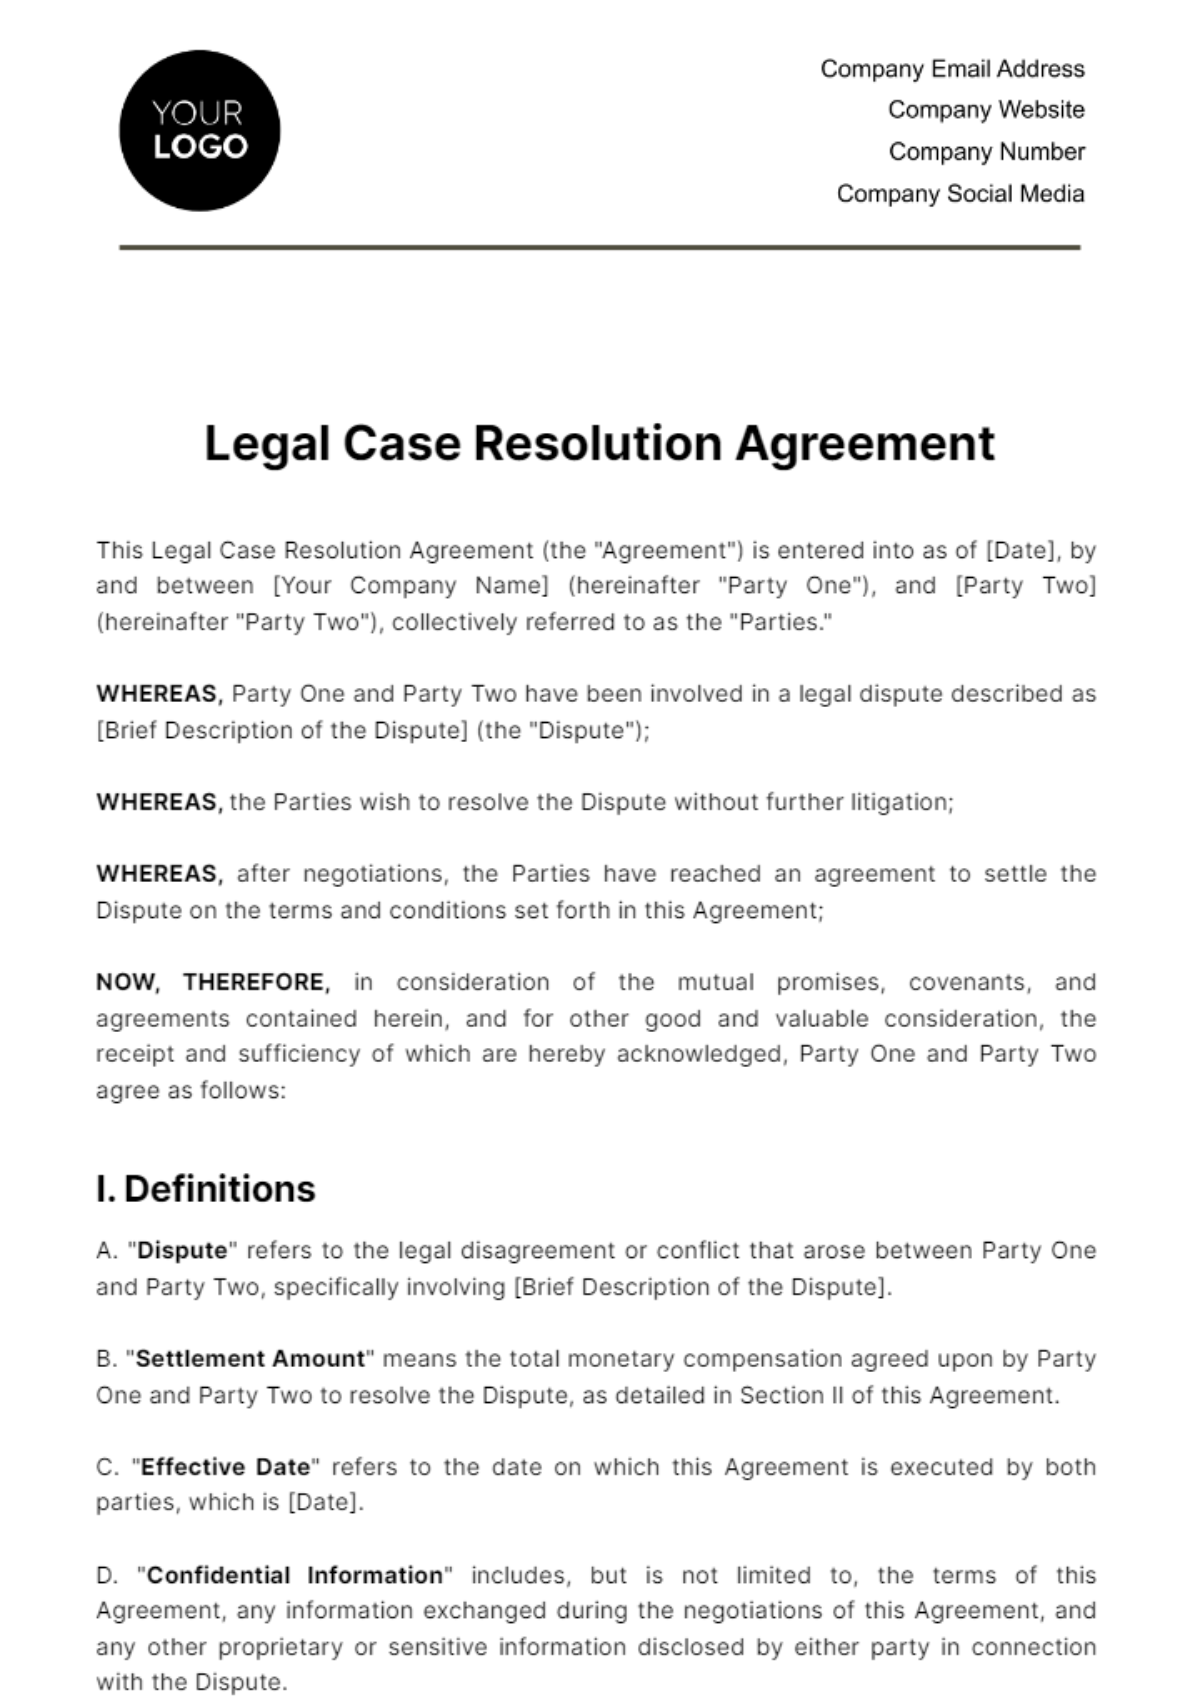 Legal Case Resolution Agreement Template